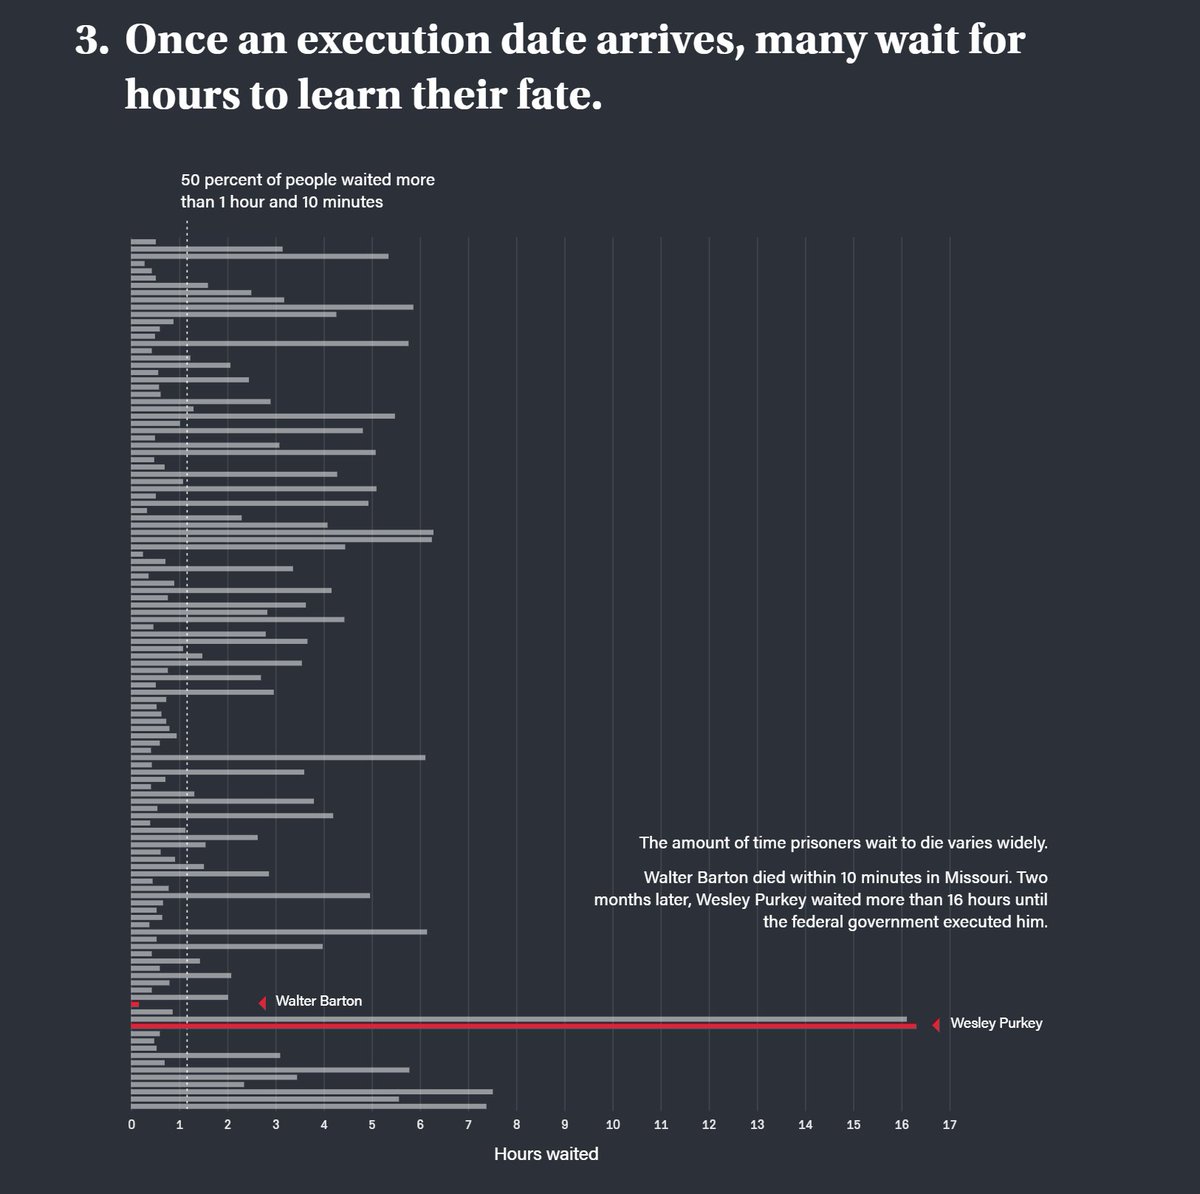 Frequently it takes a long time to actually carry out the execution. Sometimes it's the dying that takes a long time, but sometimes it's the hours of waiting around for court rulings. 50% of people waited more than an hour and ten minutes.